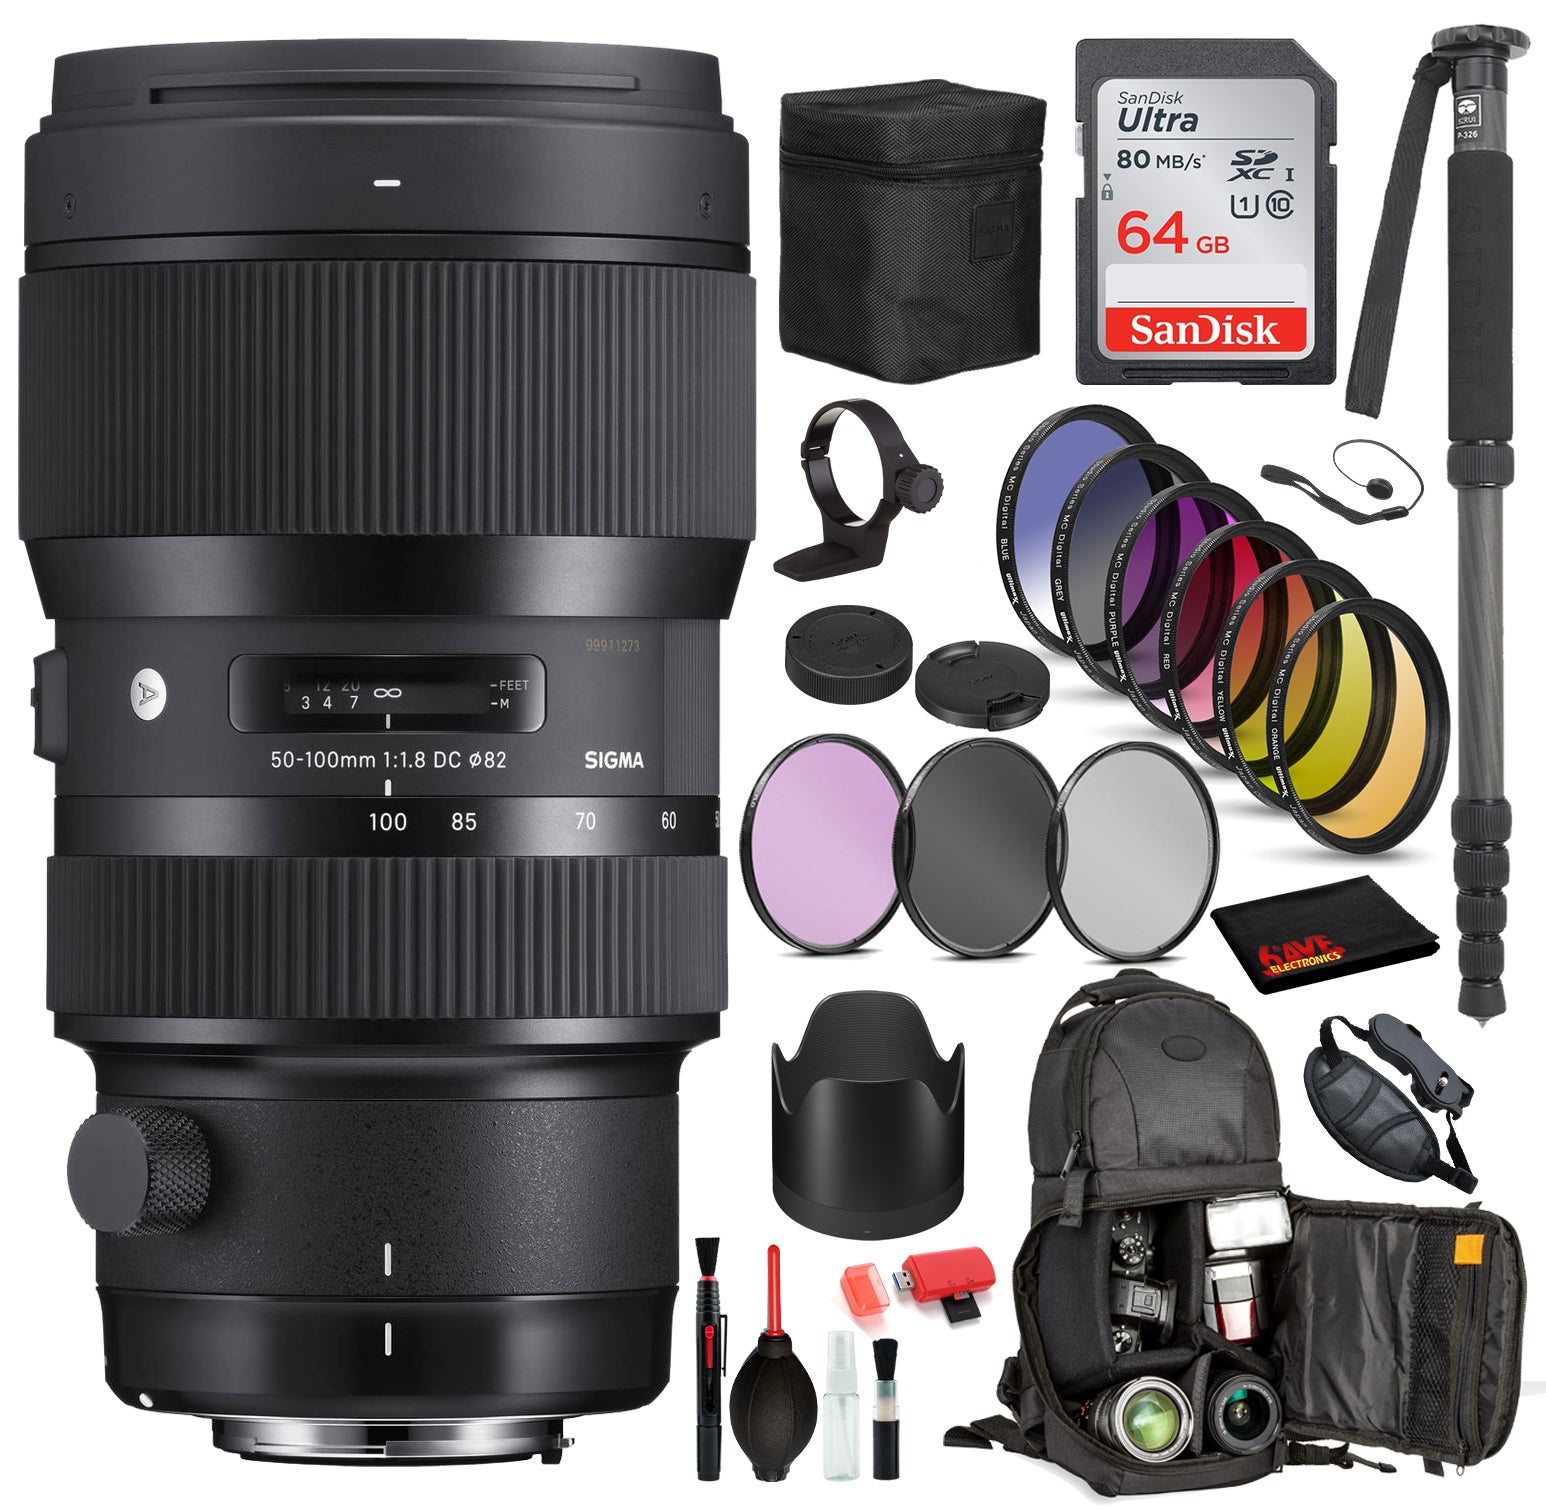 Sigma 50-100mm f/1.8 DC HSM Art Lens for Nikon F with Bundle Includes: Sandisk 64gb SD Card, 9PC Filter Kit + More